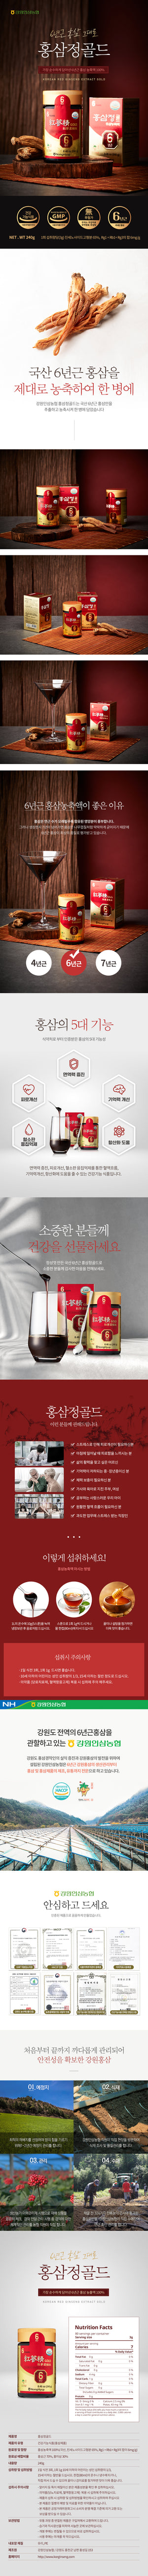 
                  
                    Red Ginseng Extract Gold Tea 240g
                  
                